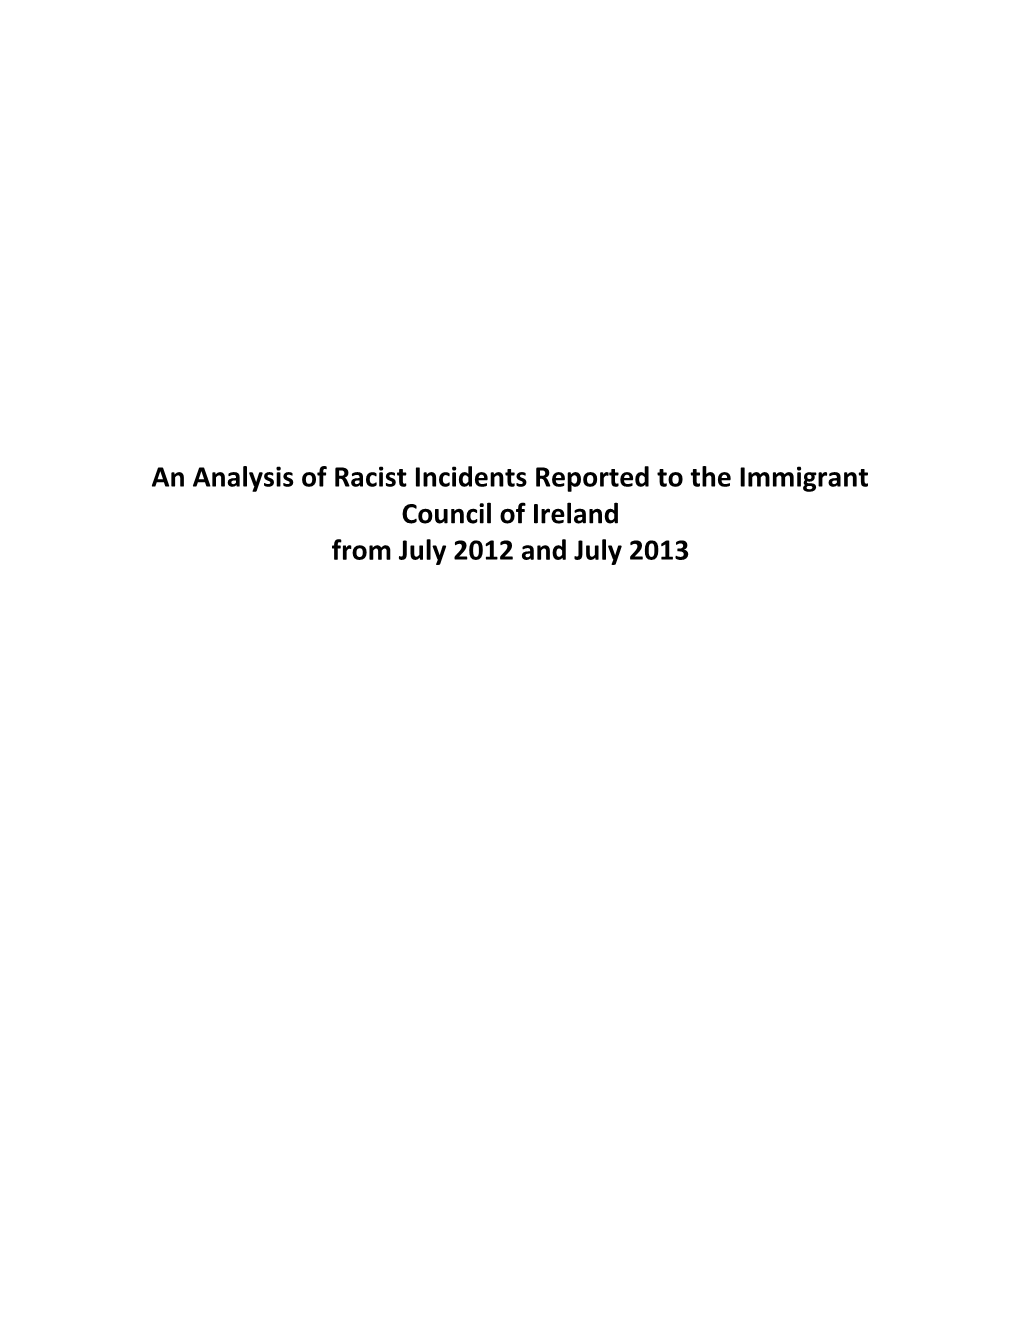 An Analysis of Racist Incidents Reported to the Immigrant Council of Ireland